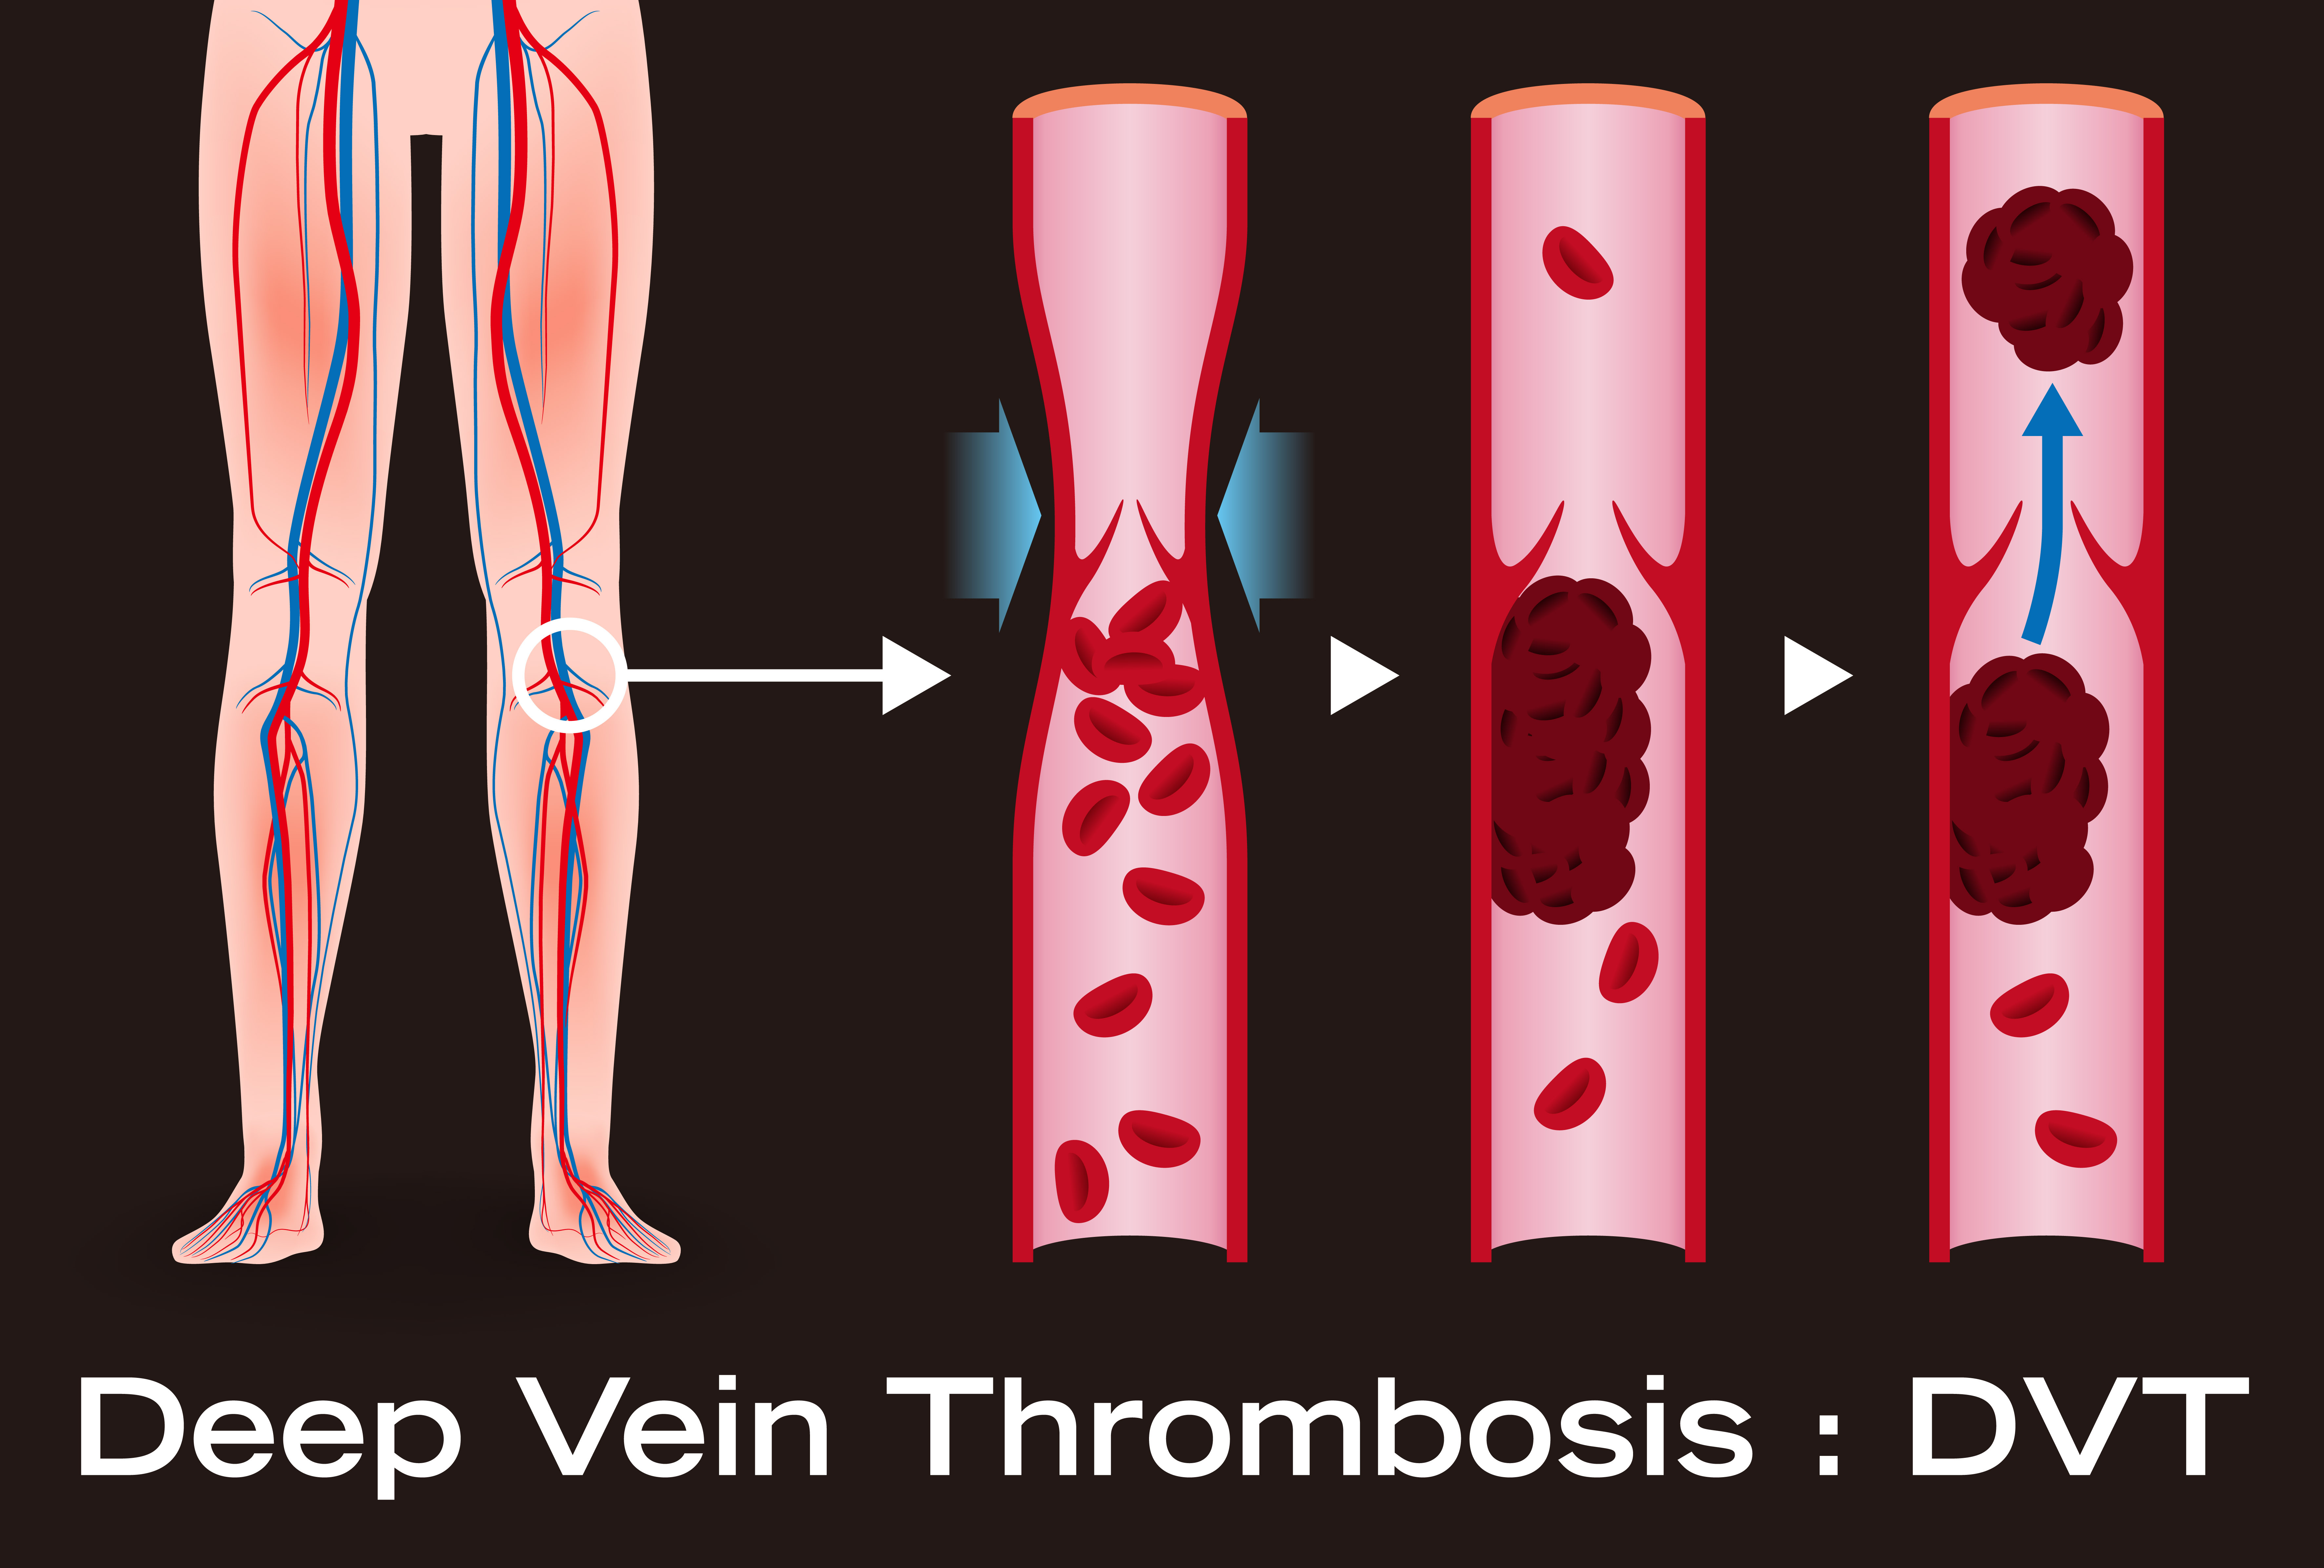 Causes of DVT in Absence of Risk Factors & Clotting Disorder